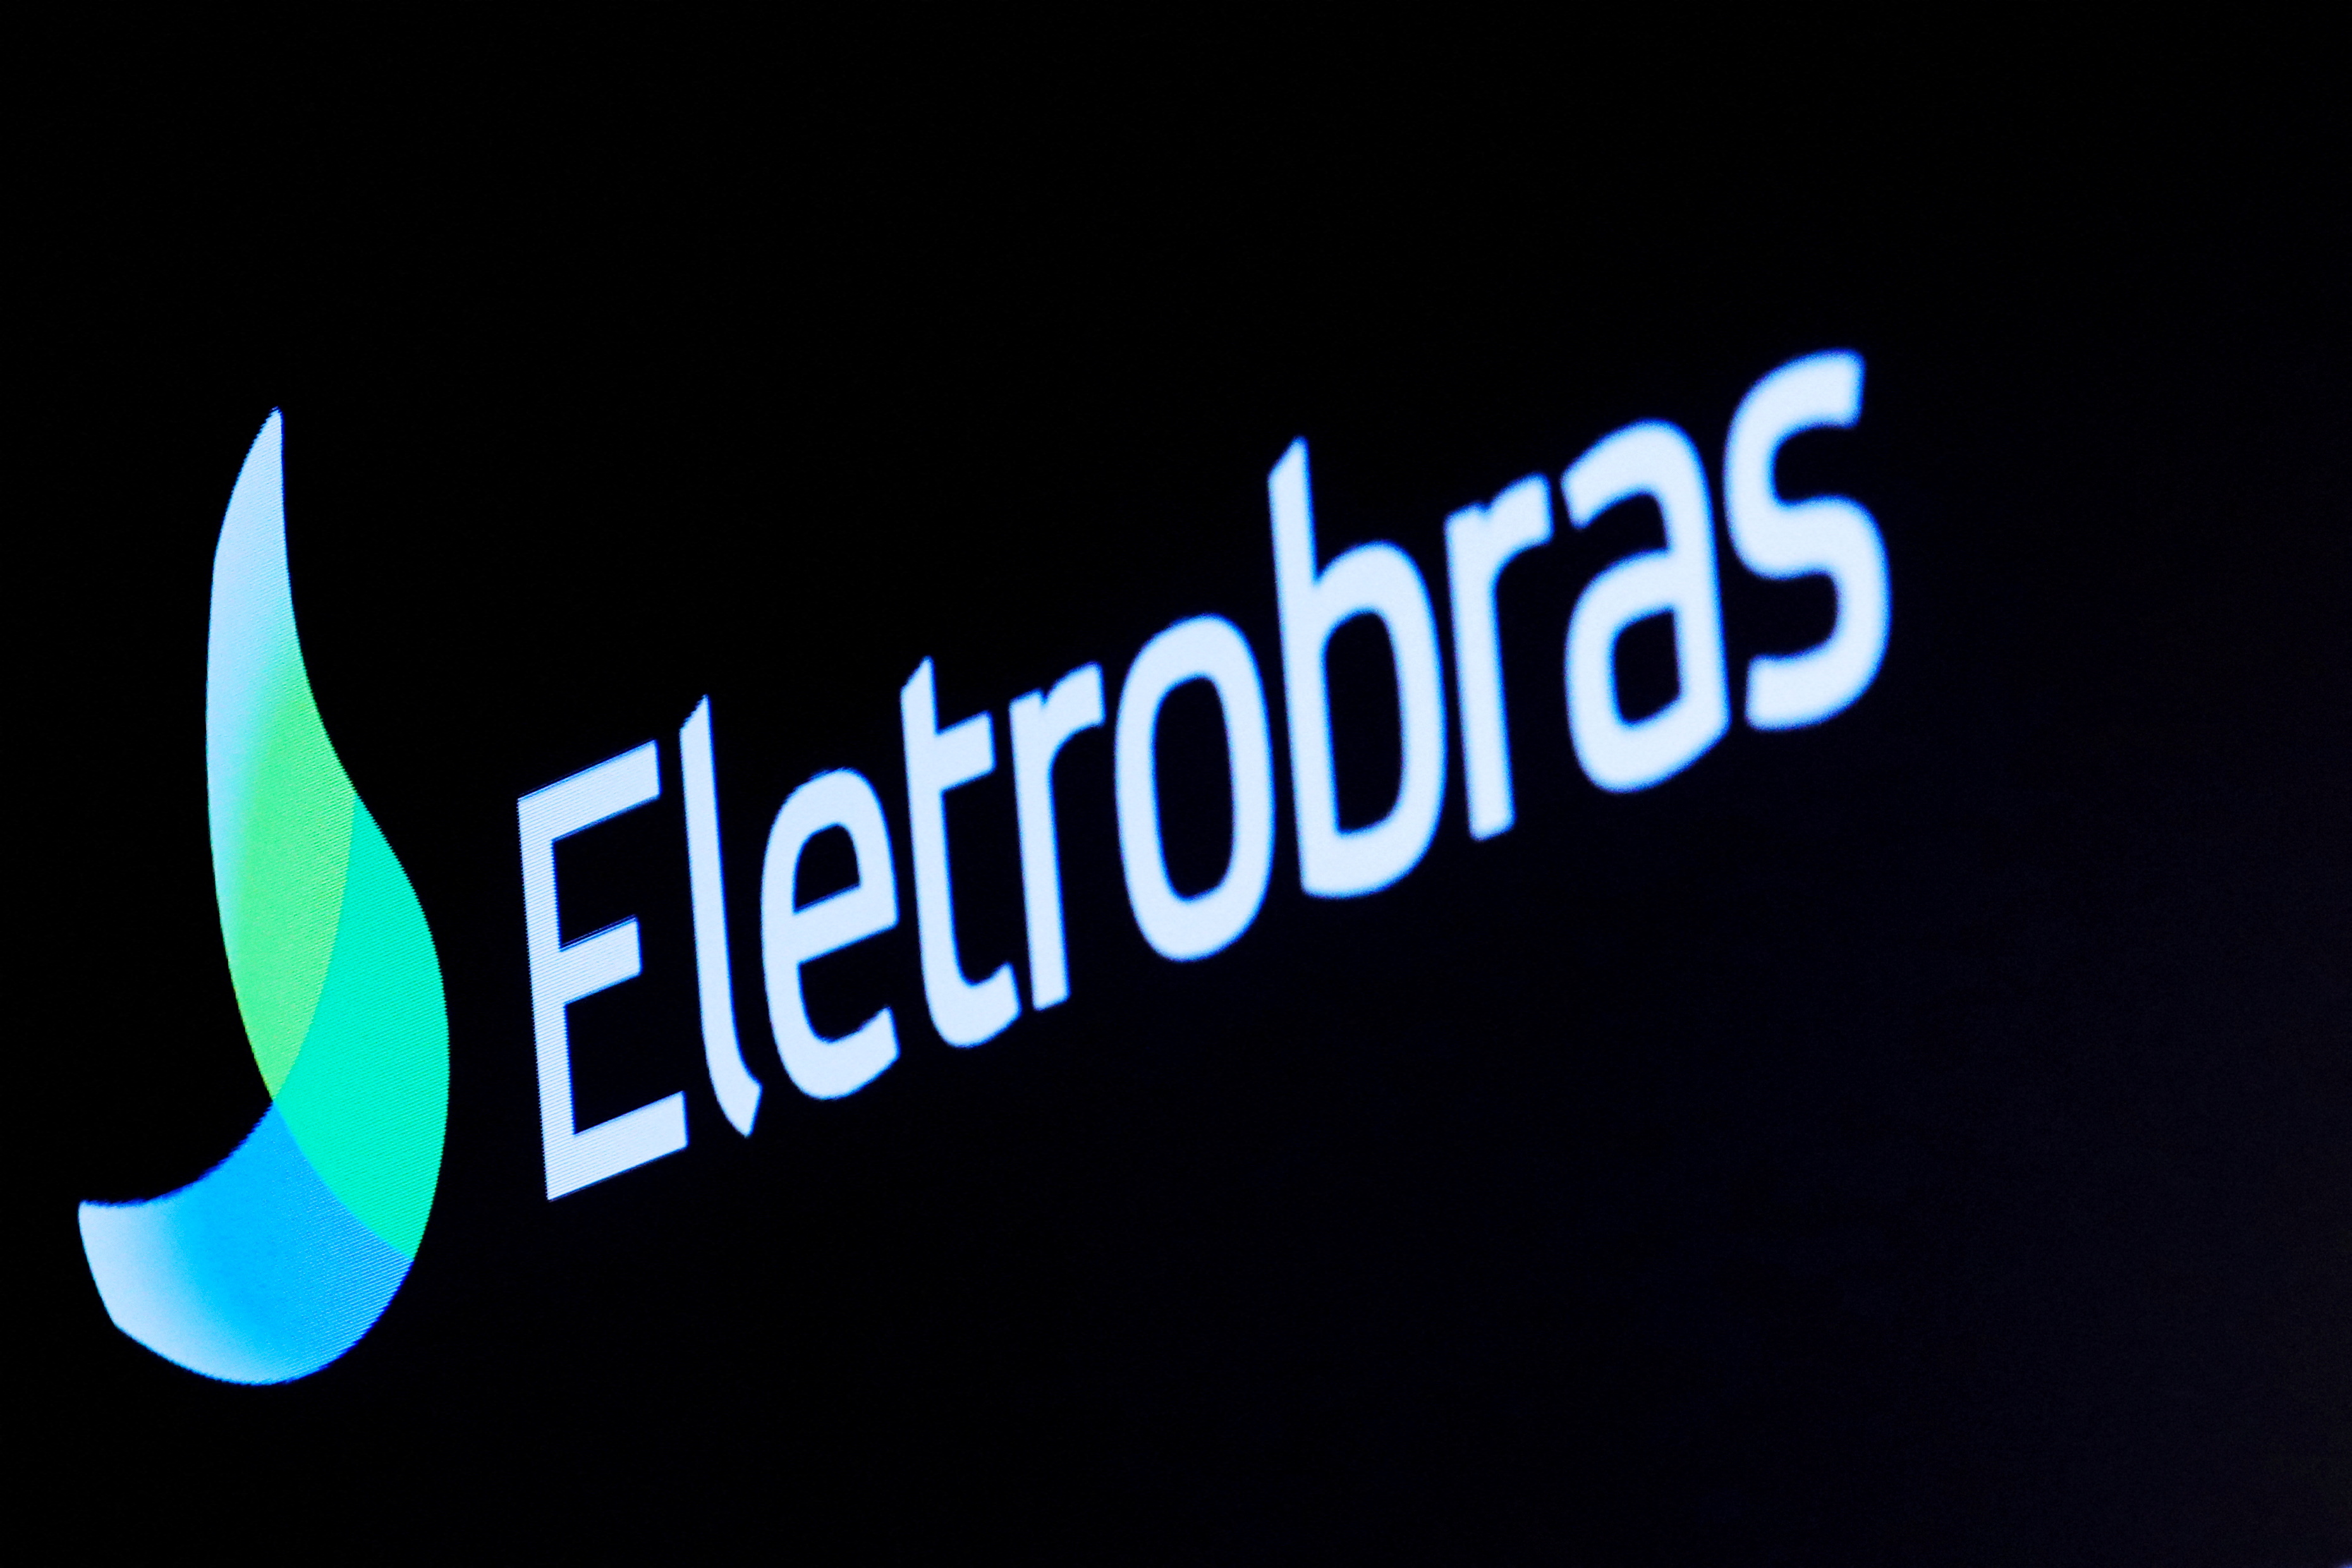 The logo for Eletrobras, a Brazilian electric utilities company, is displayed on a screen on the floor at the NYSE in New York